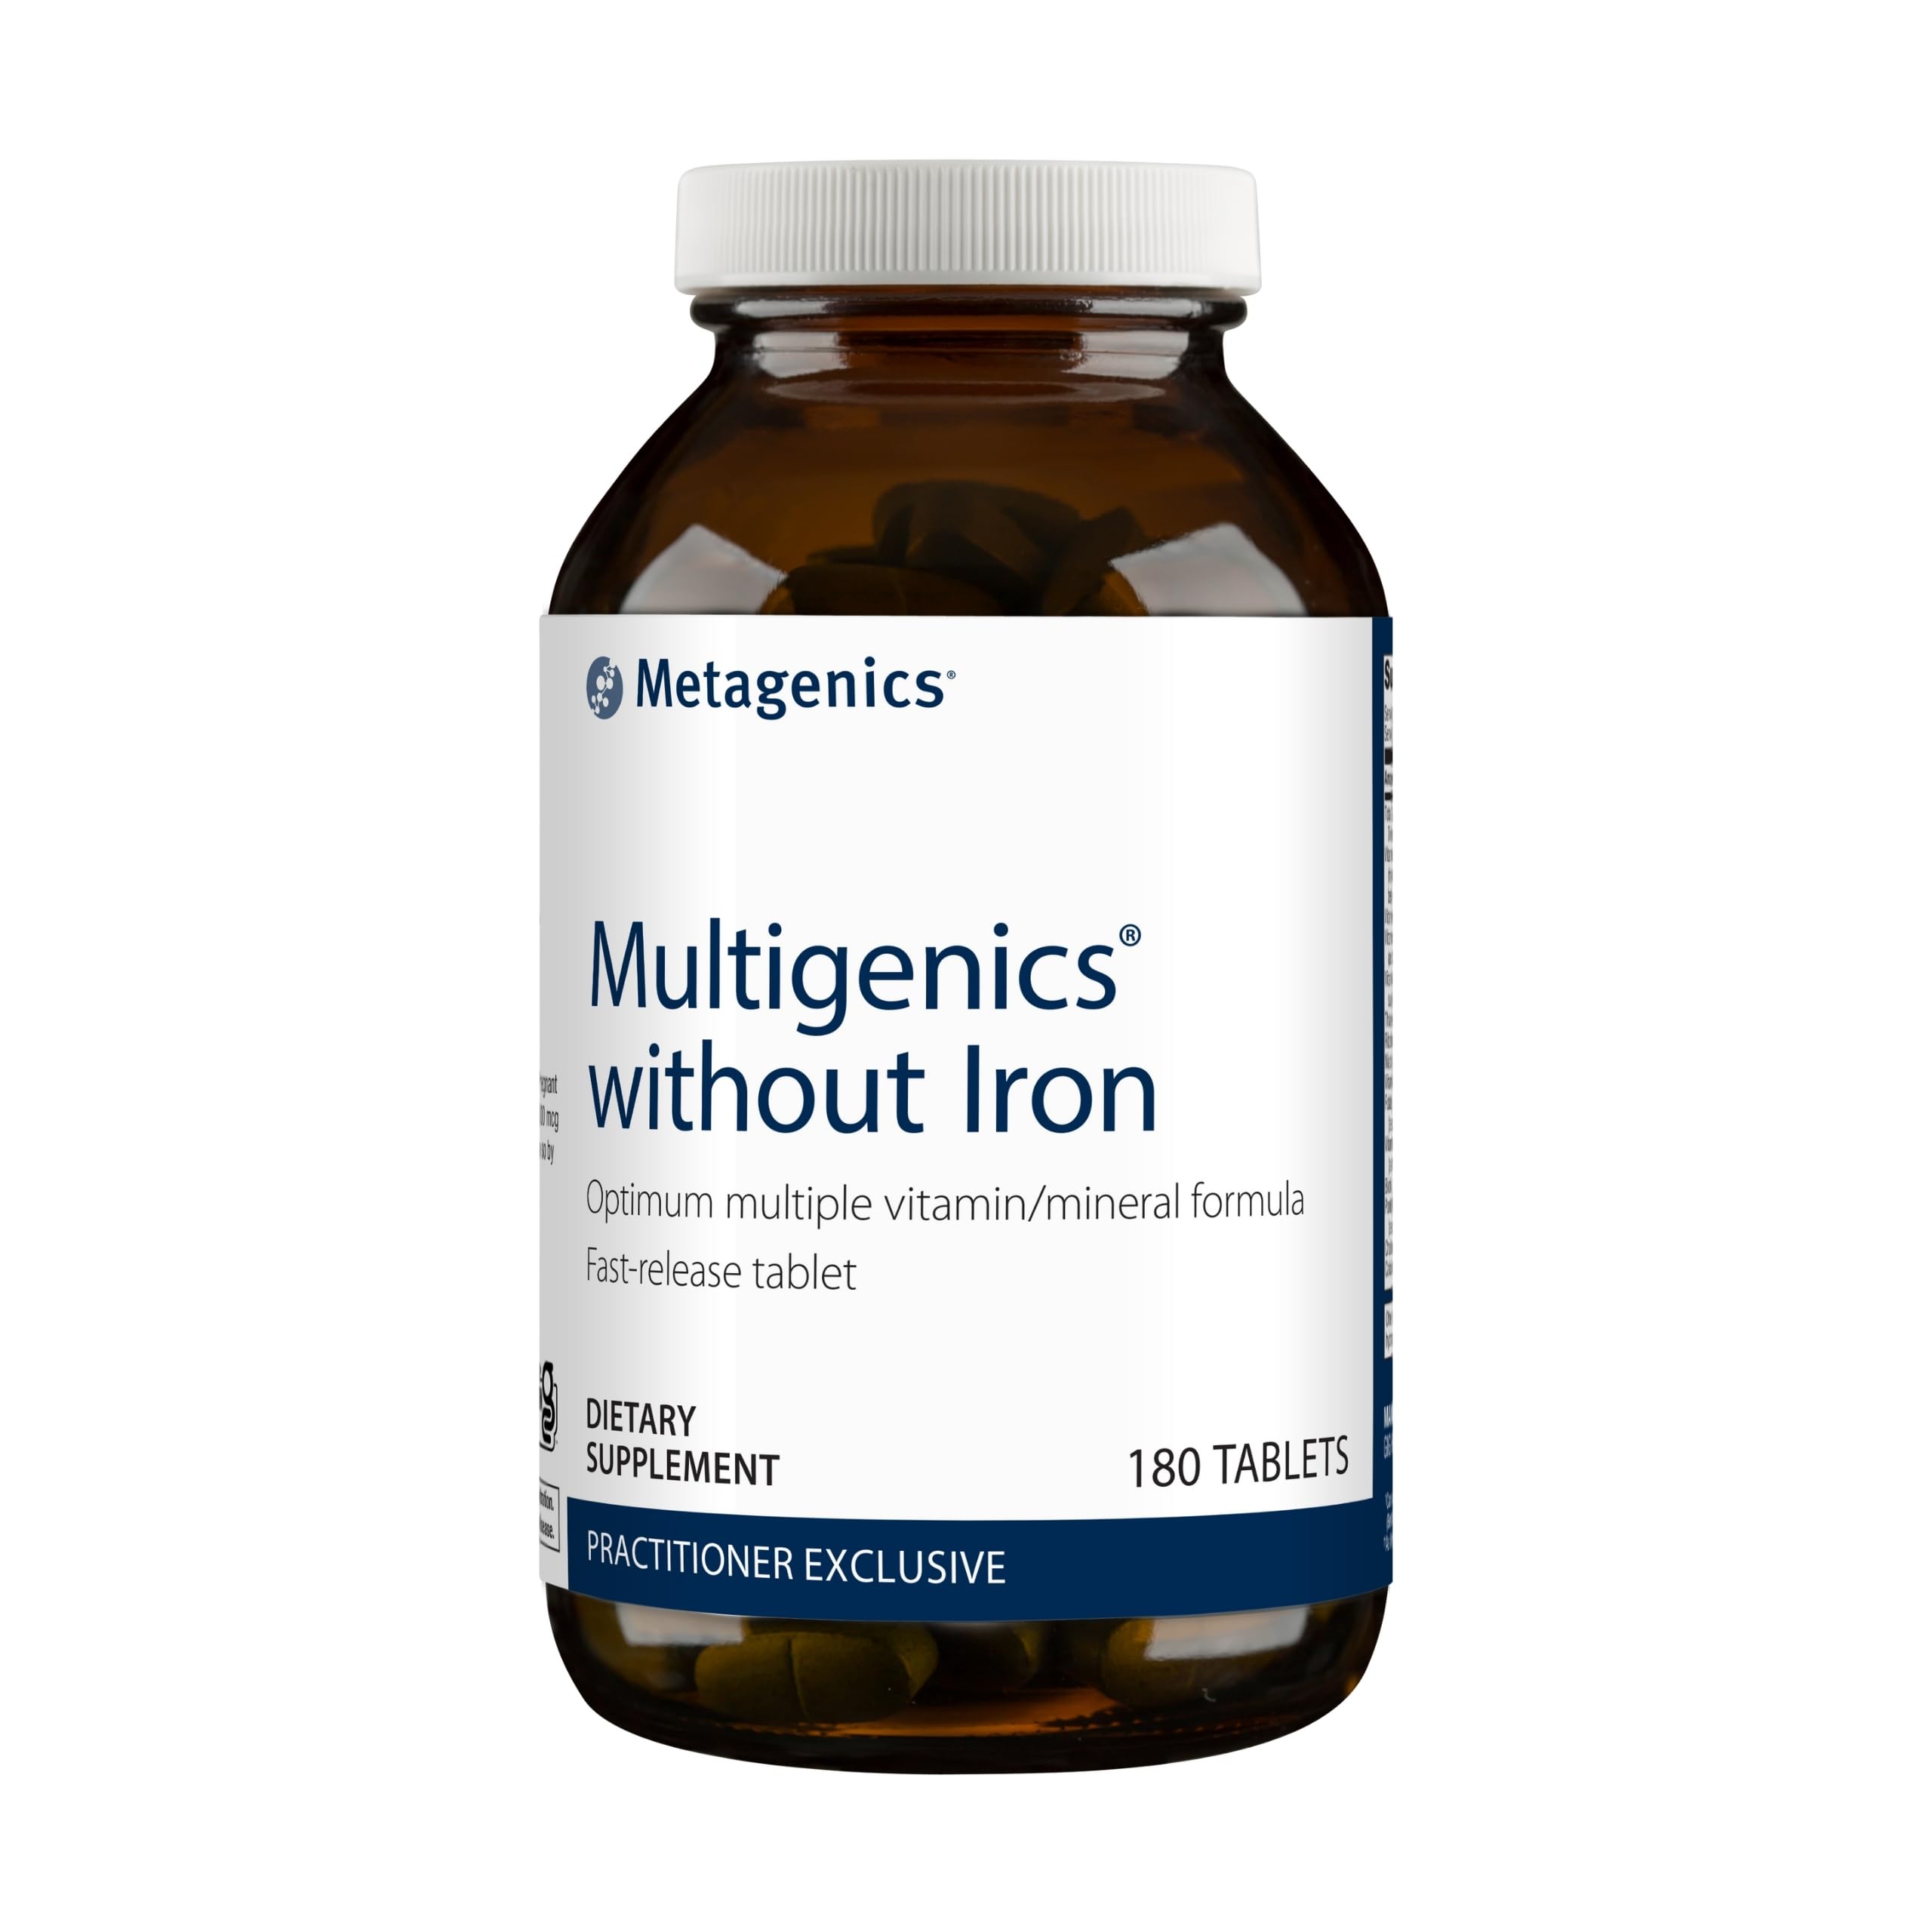 Metagenics Multigenics Without Iron Fast-Release Multivitamin - 180 Tablets